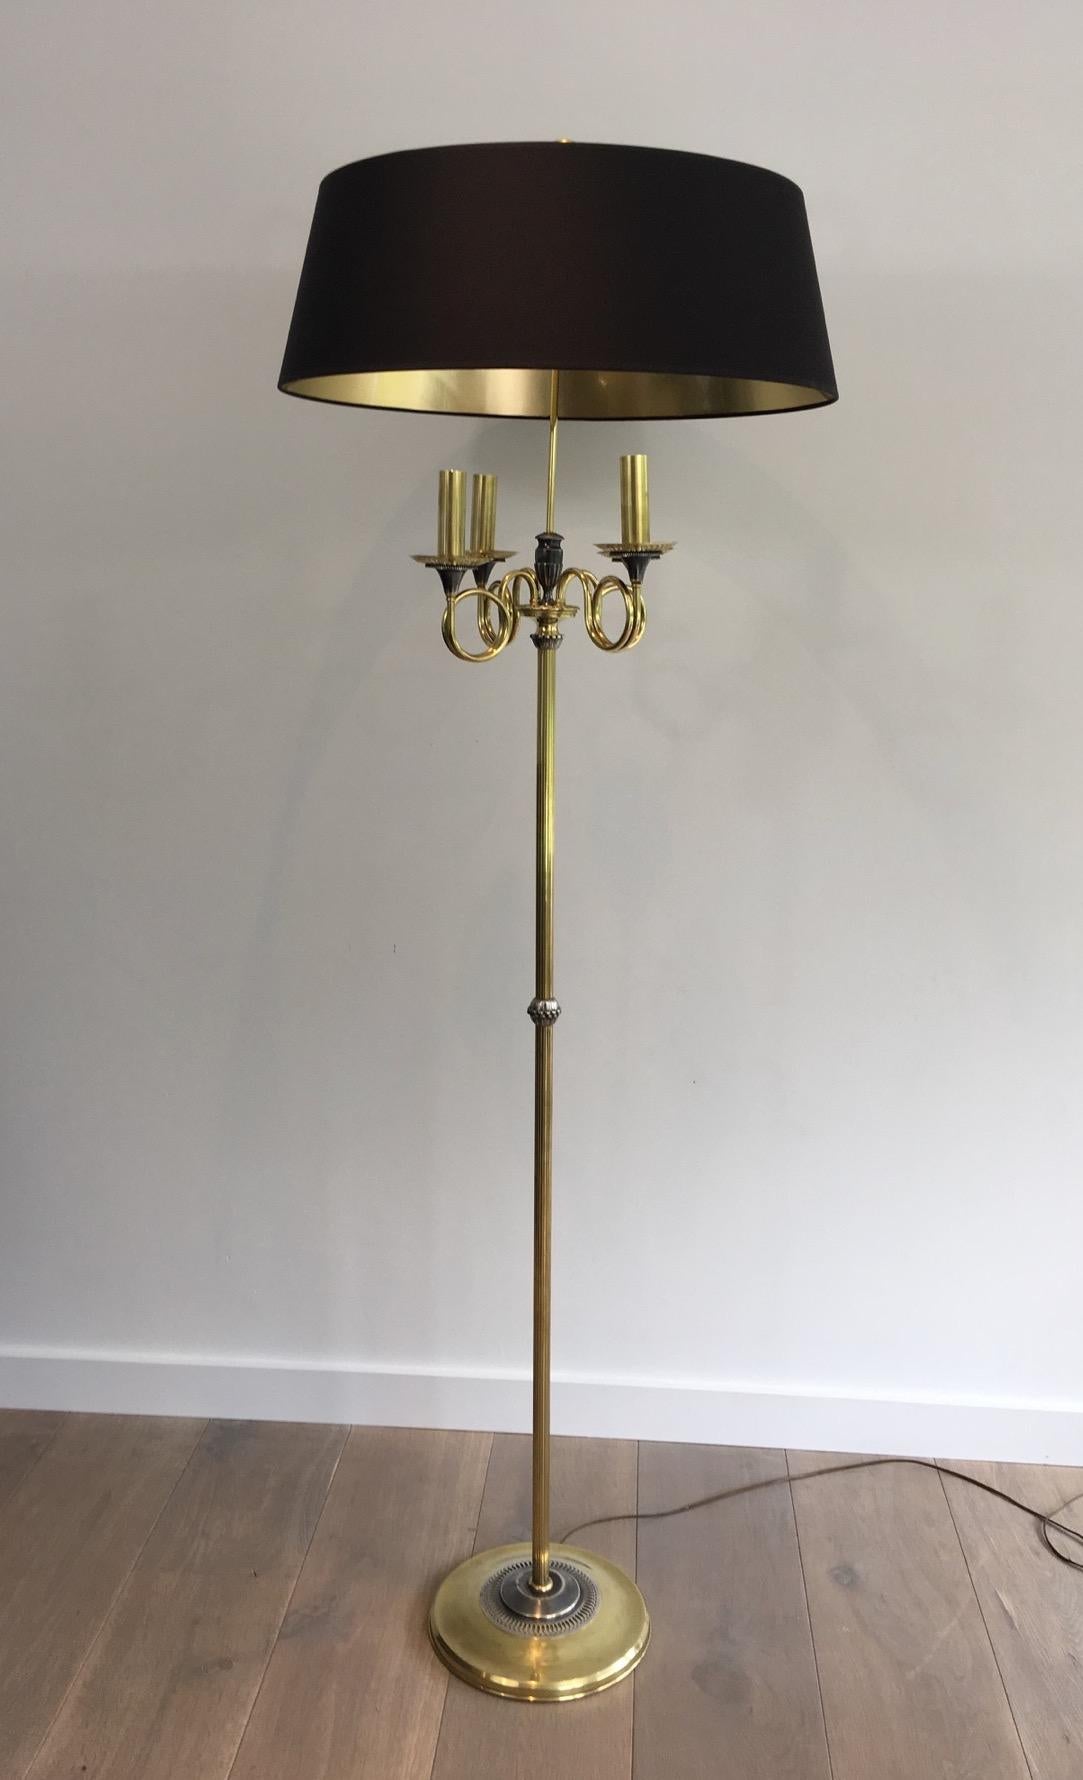 This very nice neoclassical style floor lamp is made of  silver plated and brass. The lamp is composed of 4 lights on top of 4 brass sleeves on trumpets. It has a brass ring on top of the lamp. This is a French work in the style of Maison Charles.